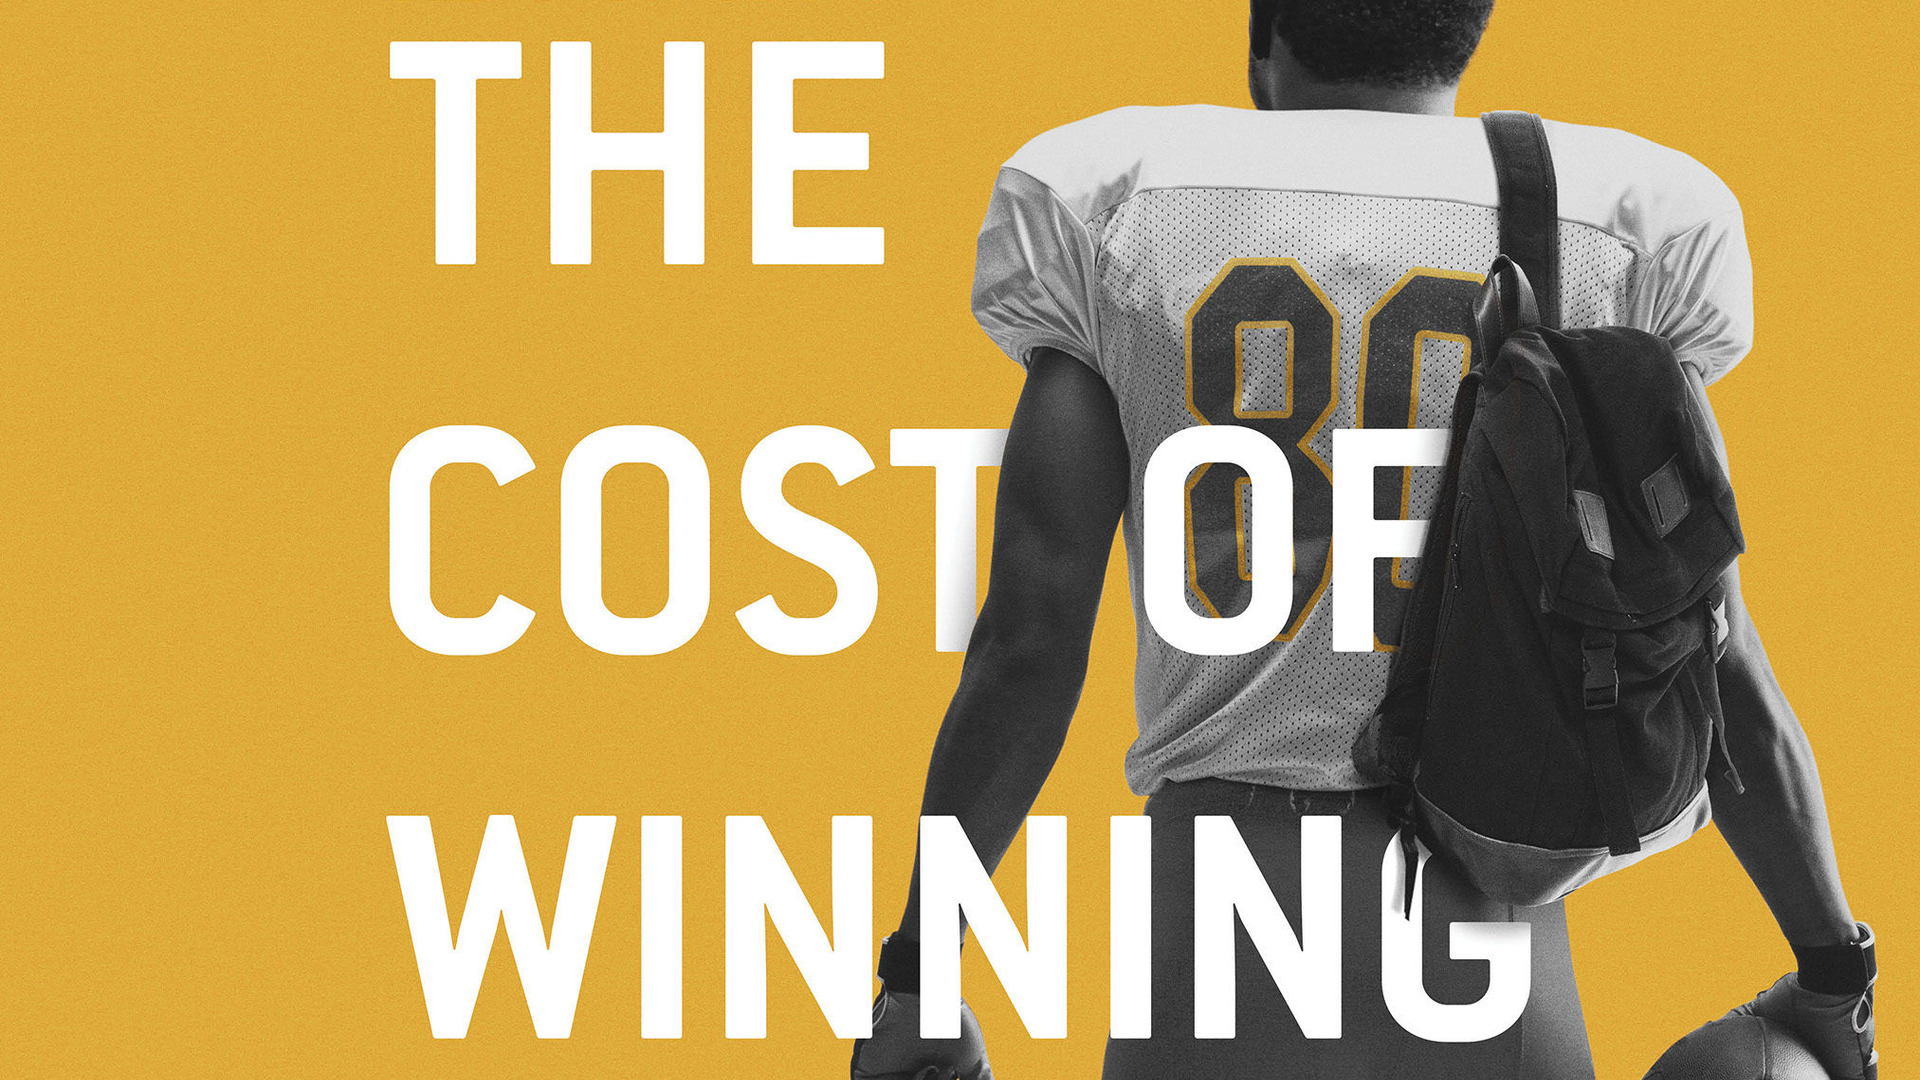 Show The Cost of Winning